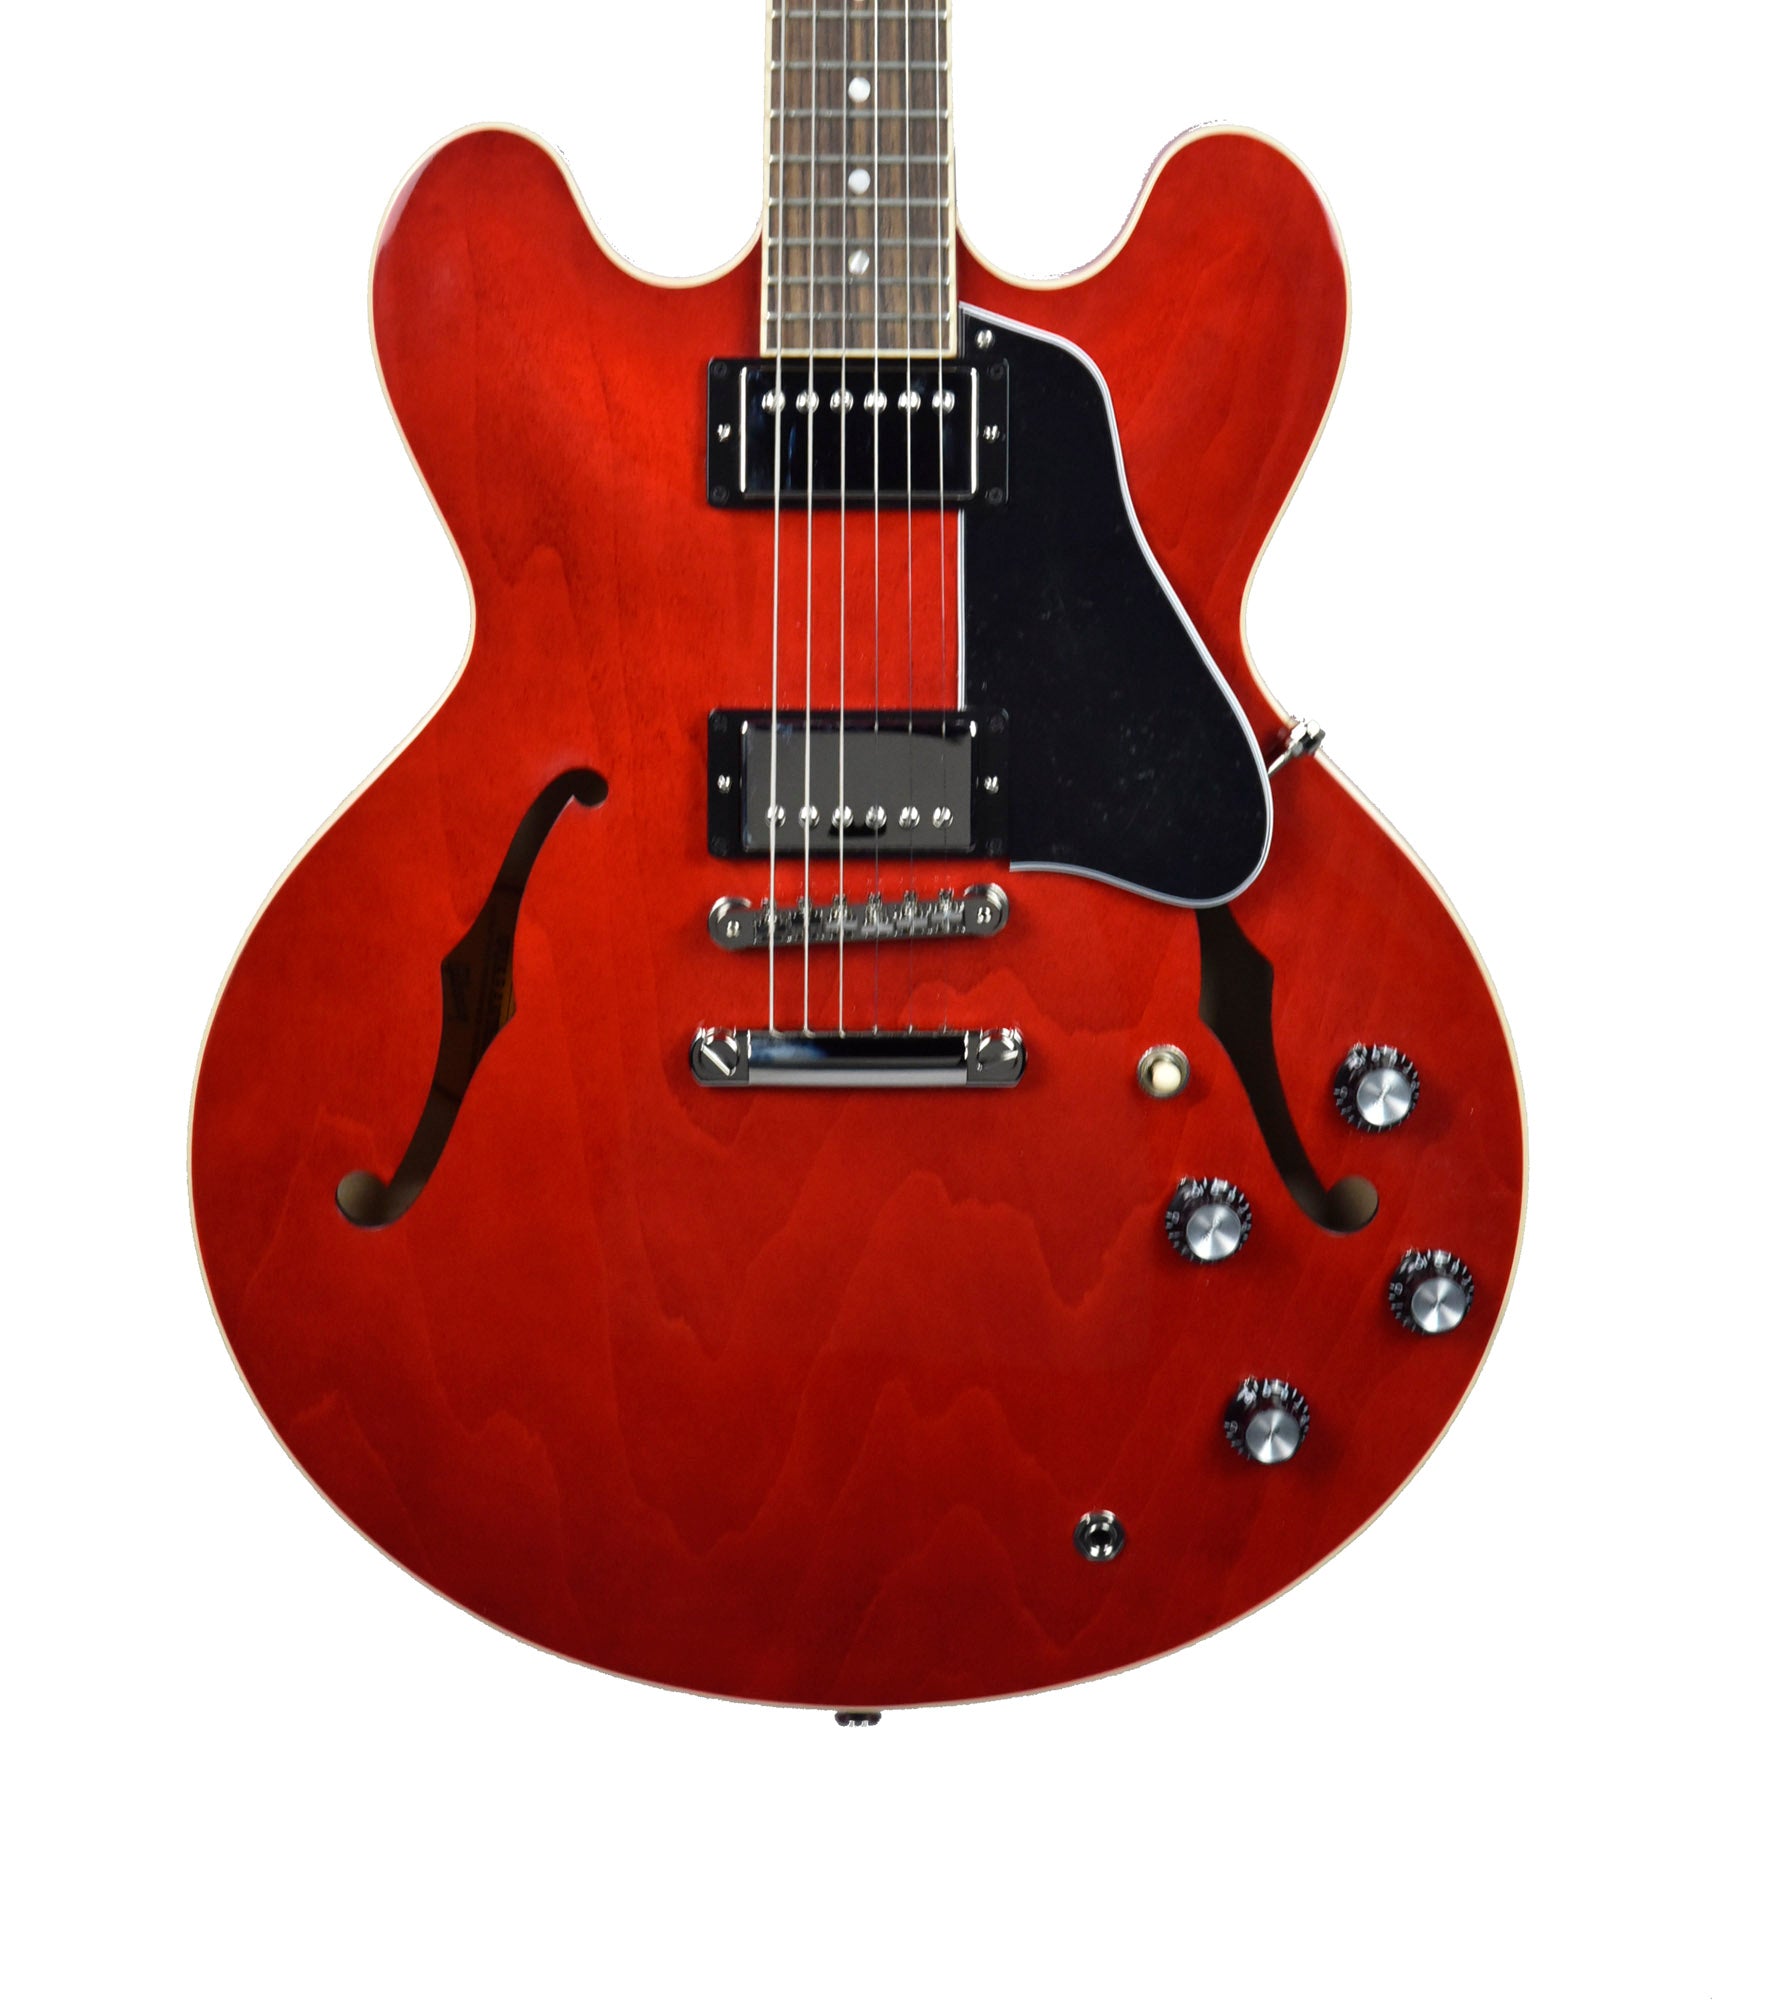 Gibson ES-335 Semi-Hollow Body Electric Guitar in Sixties Cherry